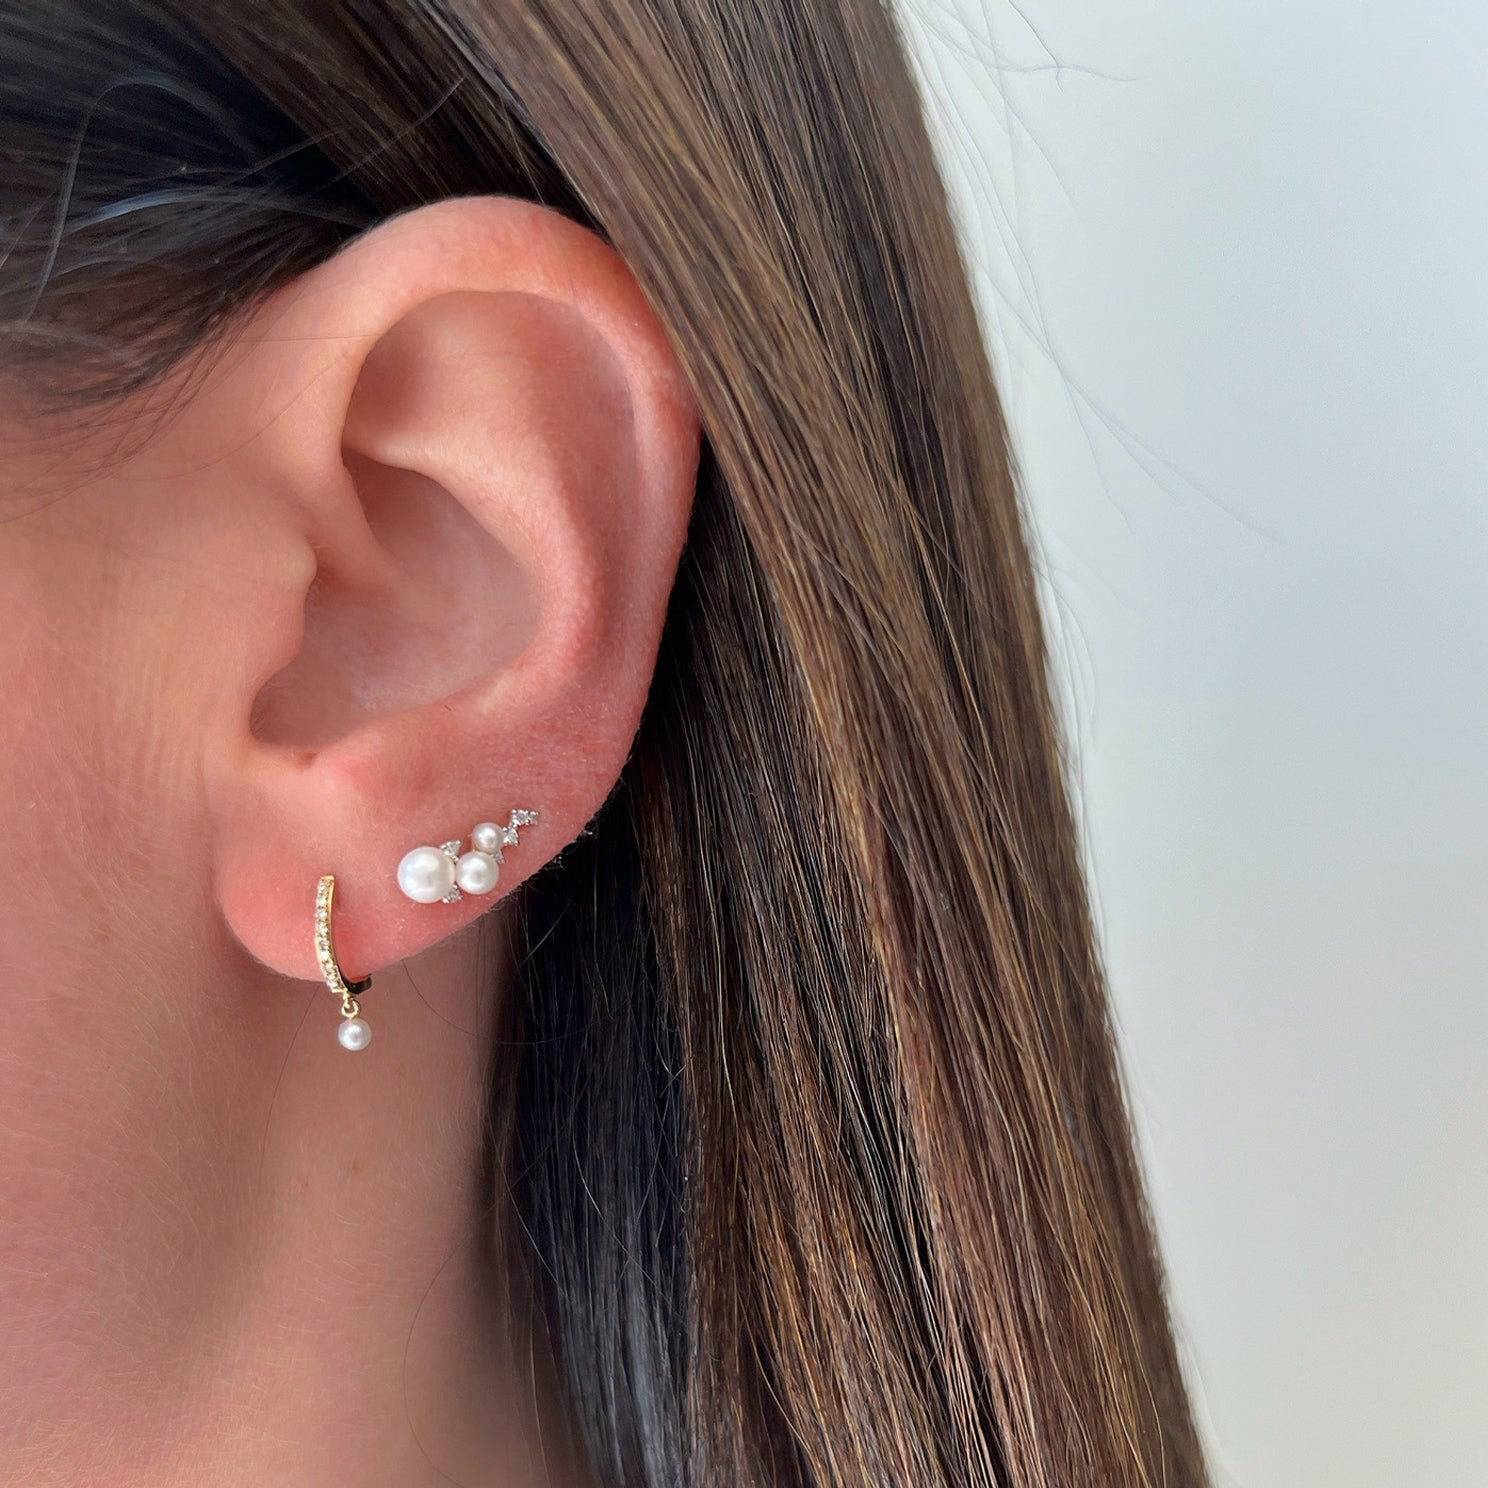 Diamond & Pearl Ear Climber in 14k yellow gold styled on second earring hole on ear lobe of model next to diamond mini huggie with pear drop